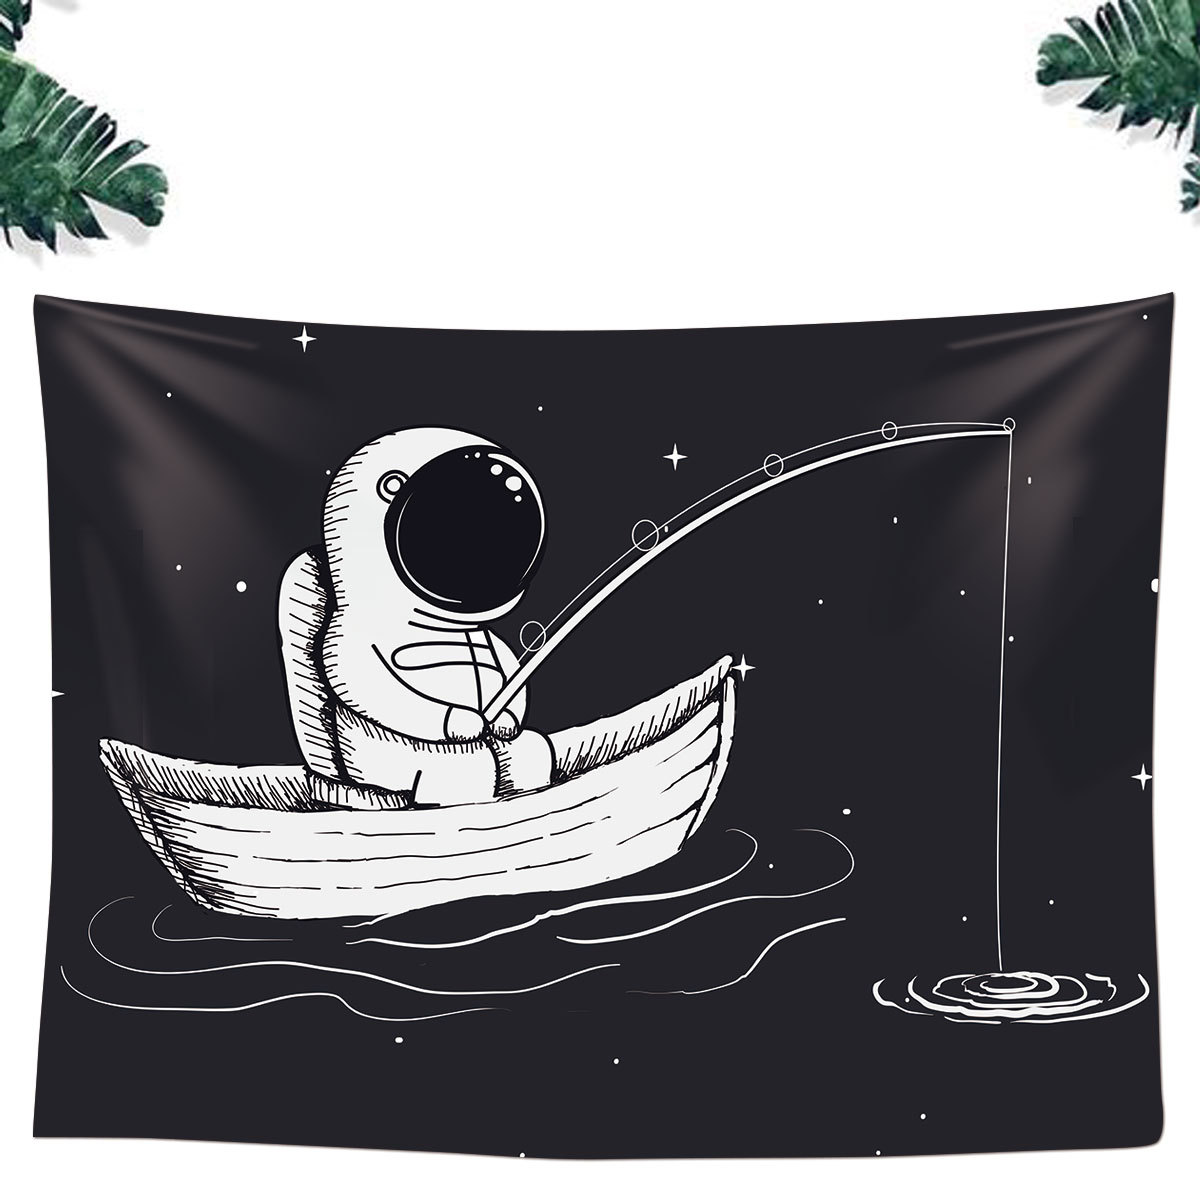 Spaceman-Series-Background-Cloth-Hanging-Cloth-Tapestry-Room-Cloth-Painting-Decoration-1751927-2